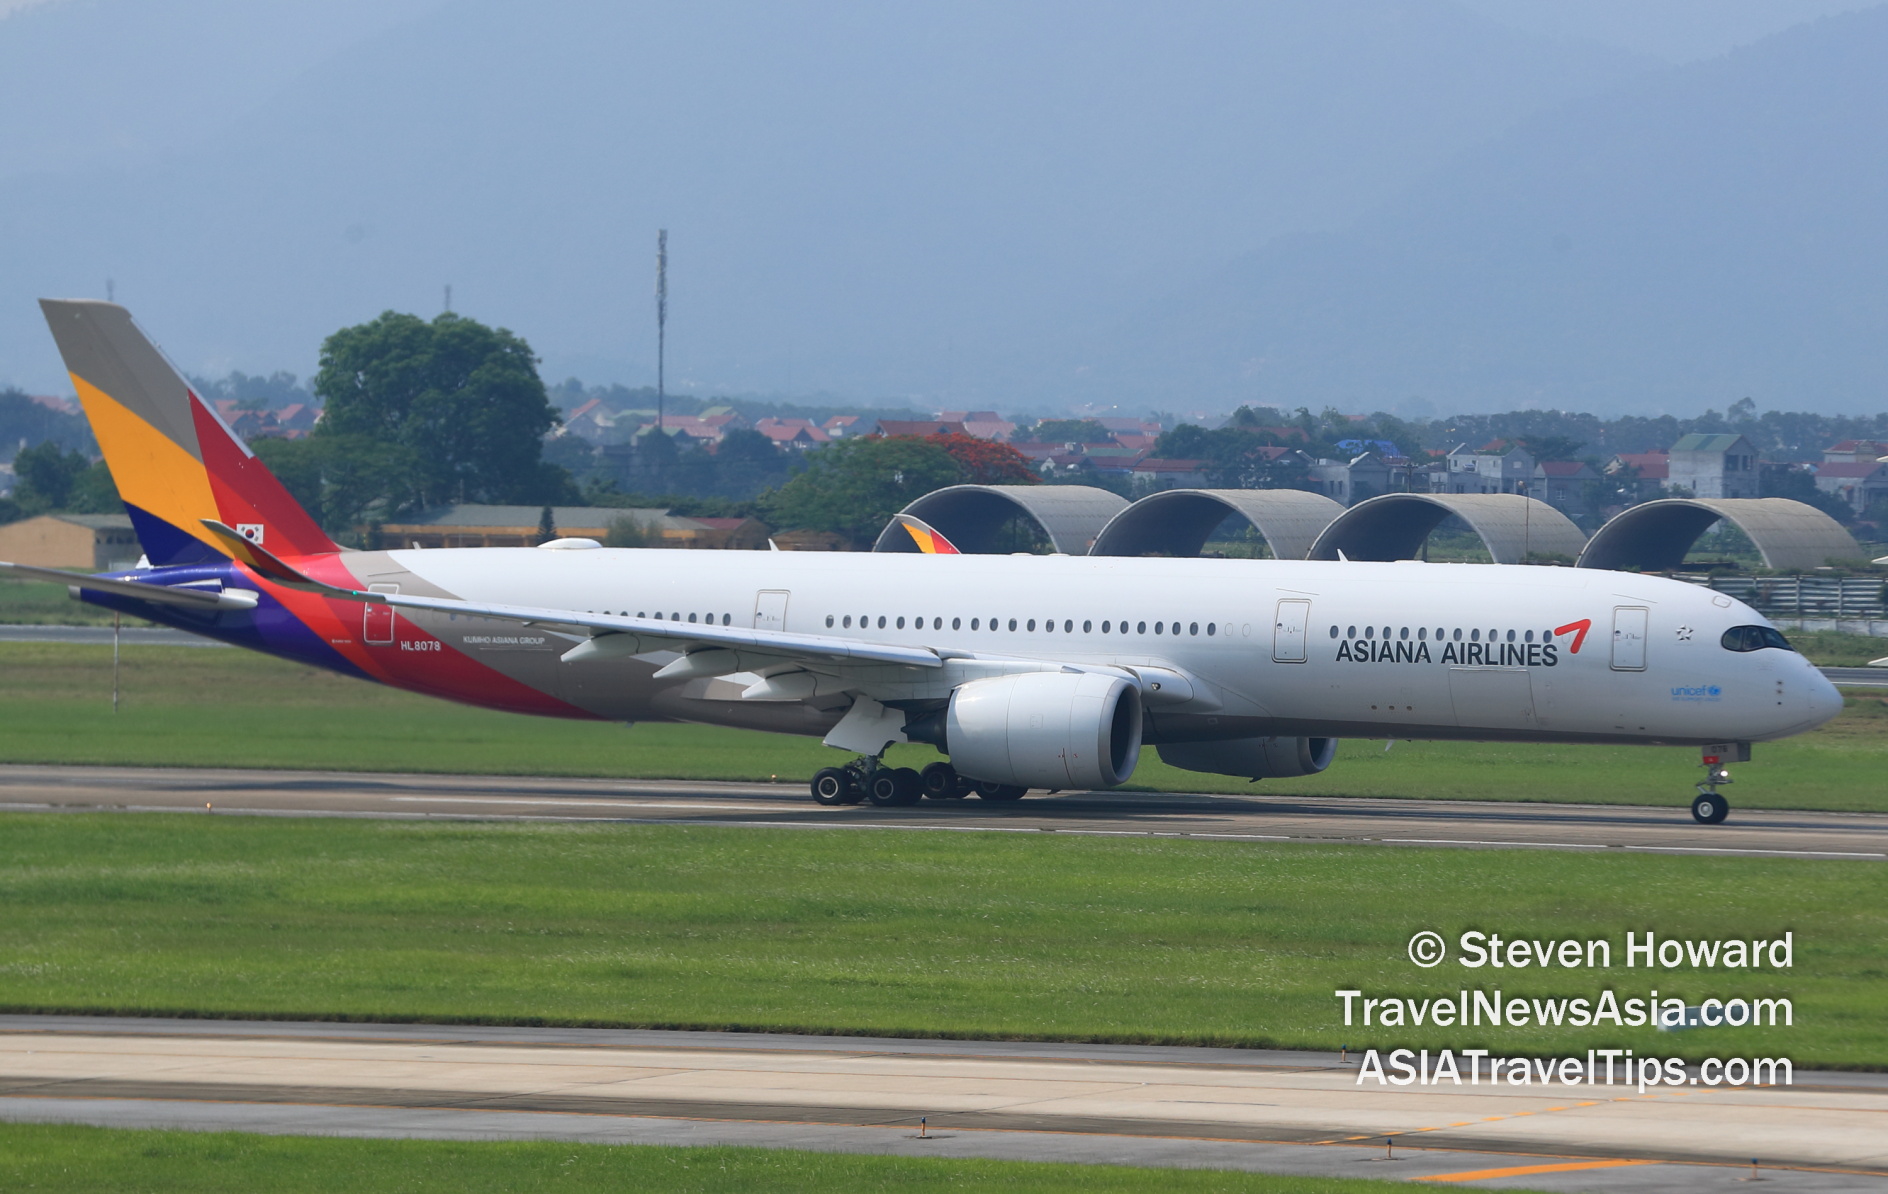 Asiana Airlines Airbus A350 reg: HL8078. Picture by Steven Howard of TravelNewsAsia.com Click to enlarge.